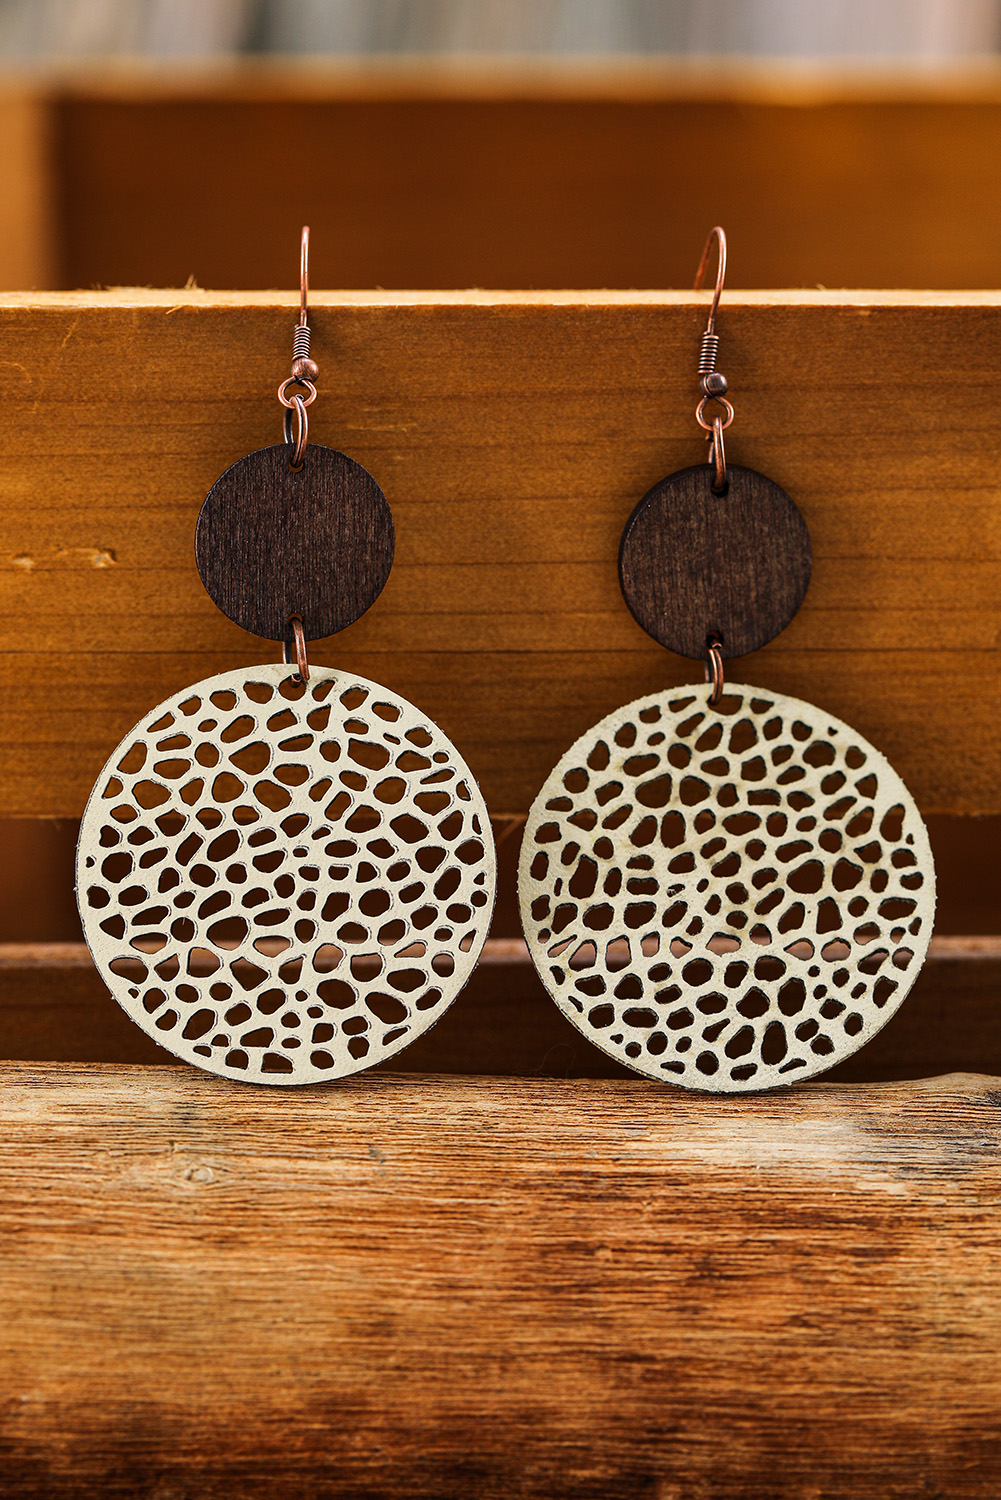 Shewin Wholesale Clothing Distributor Beige Hollow Out Wooden Round Drop Earrings